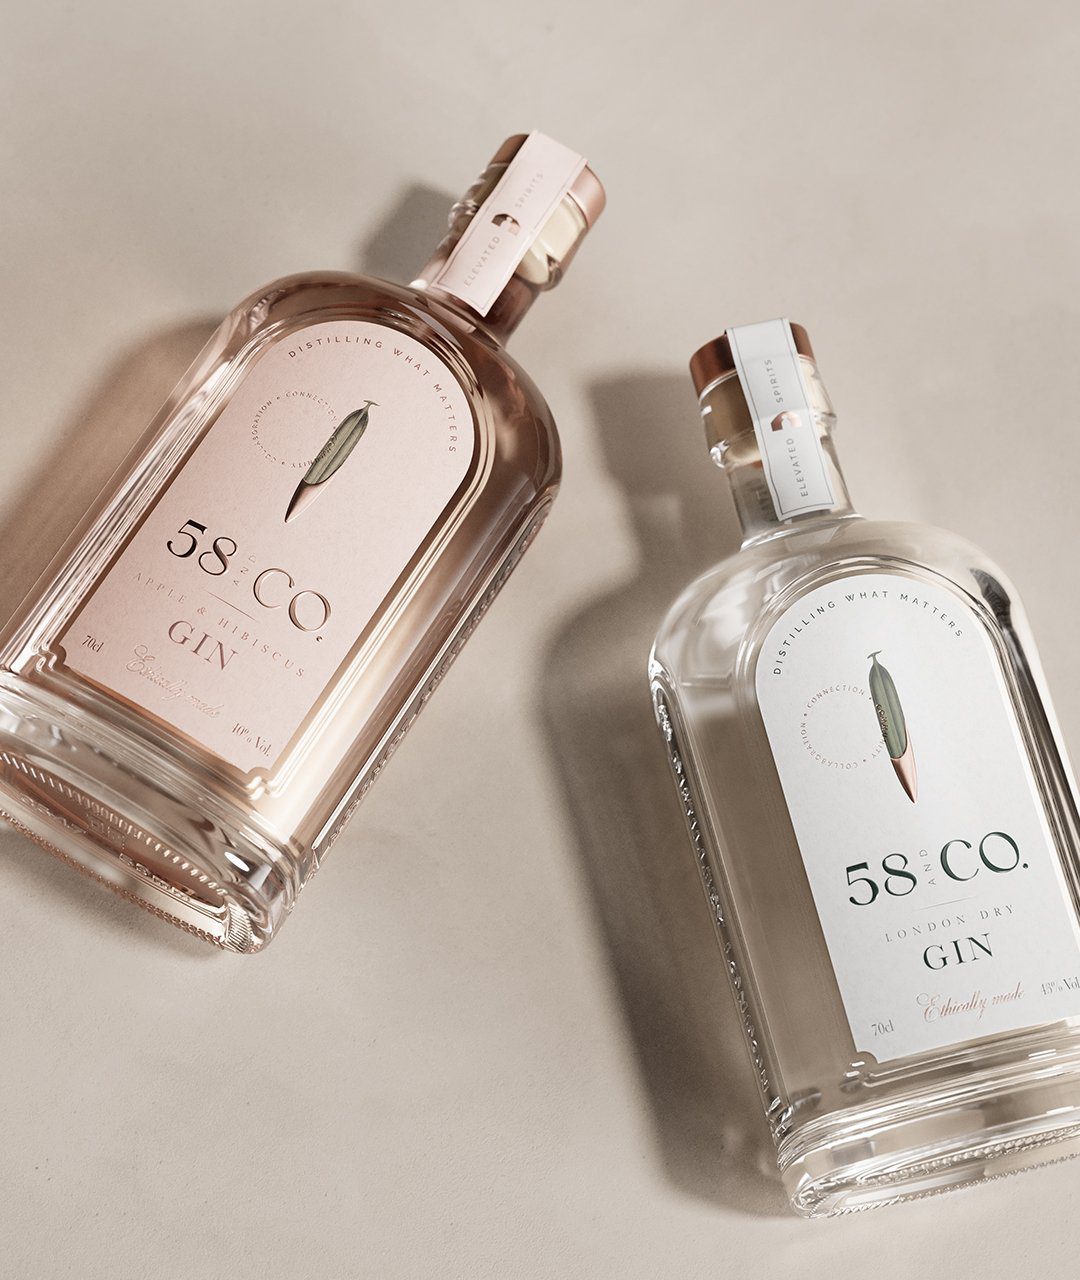 58 and Co Gin and Apple & Hibiscus Gin Rebrand by Kingdom and Sparrow